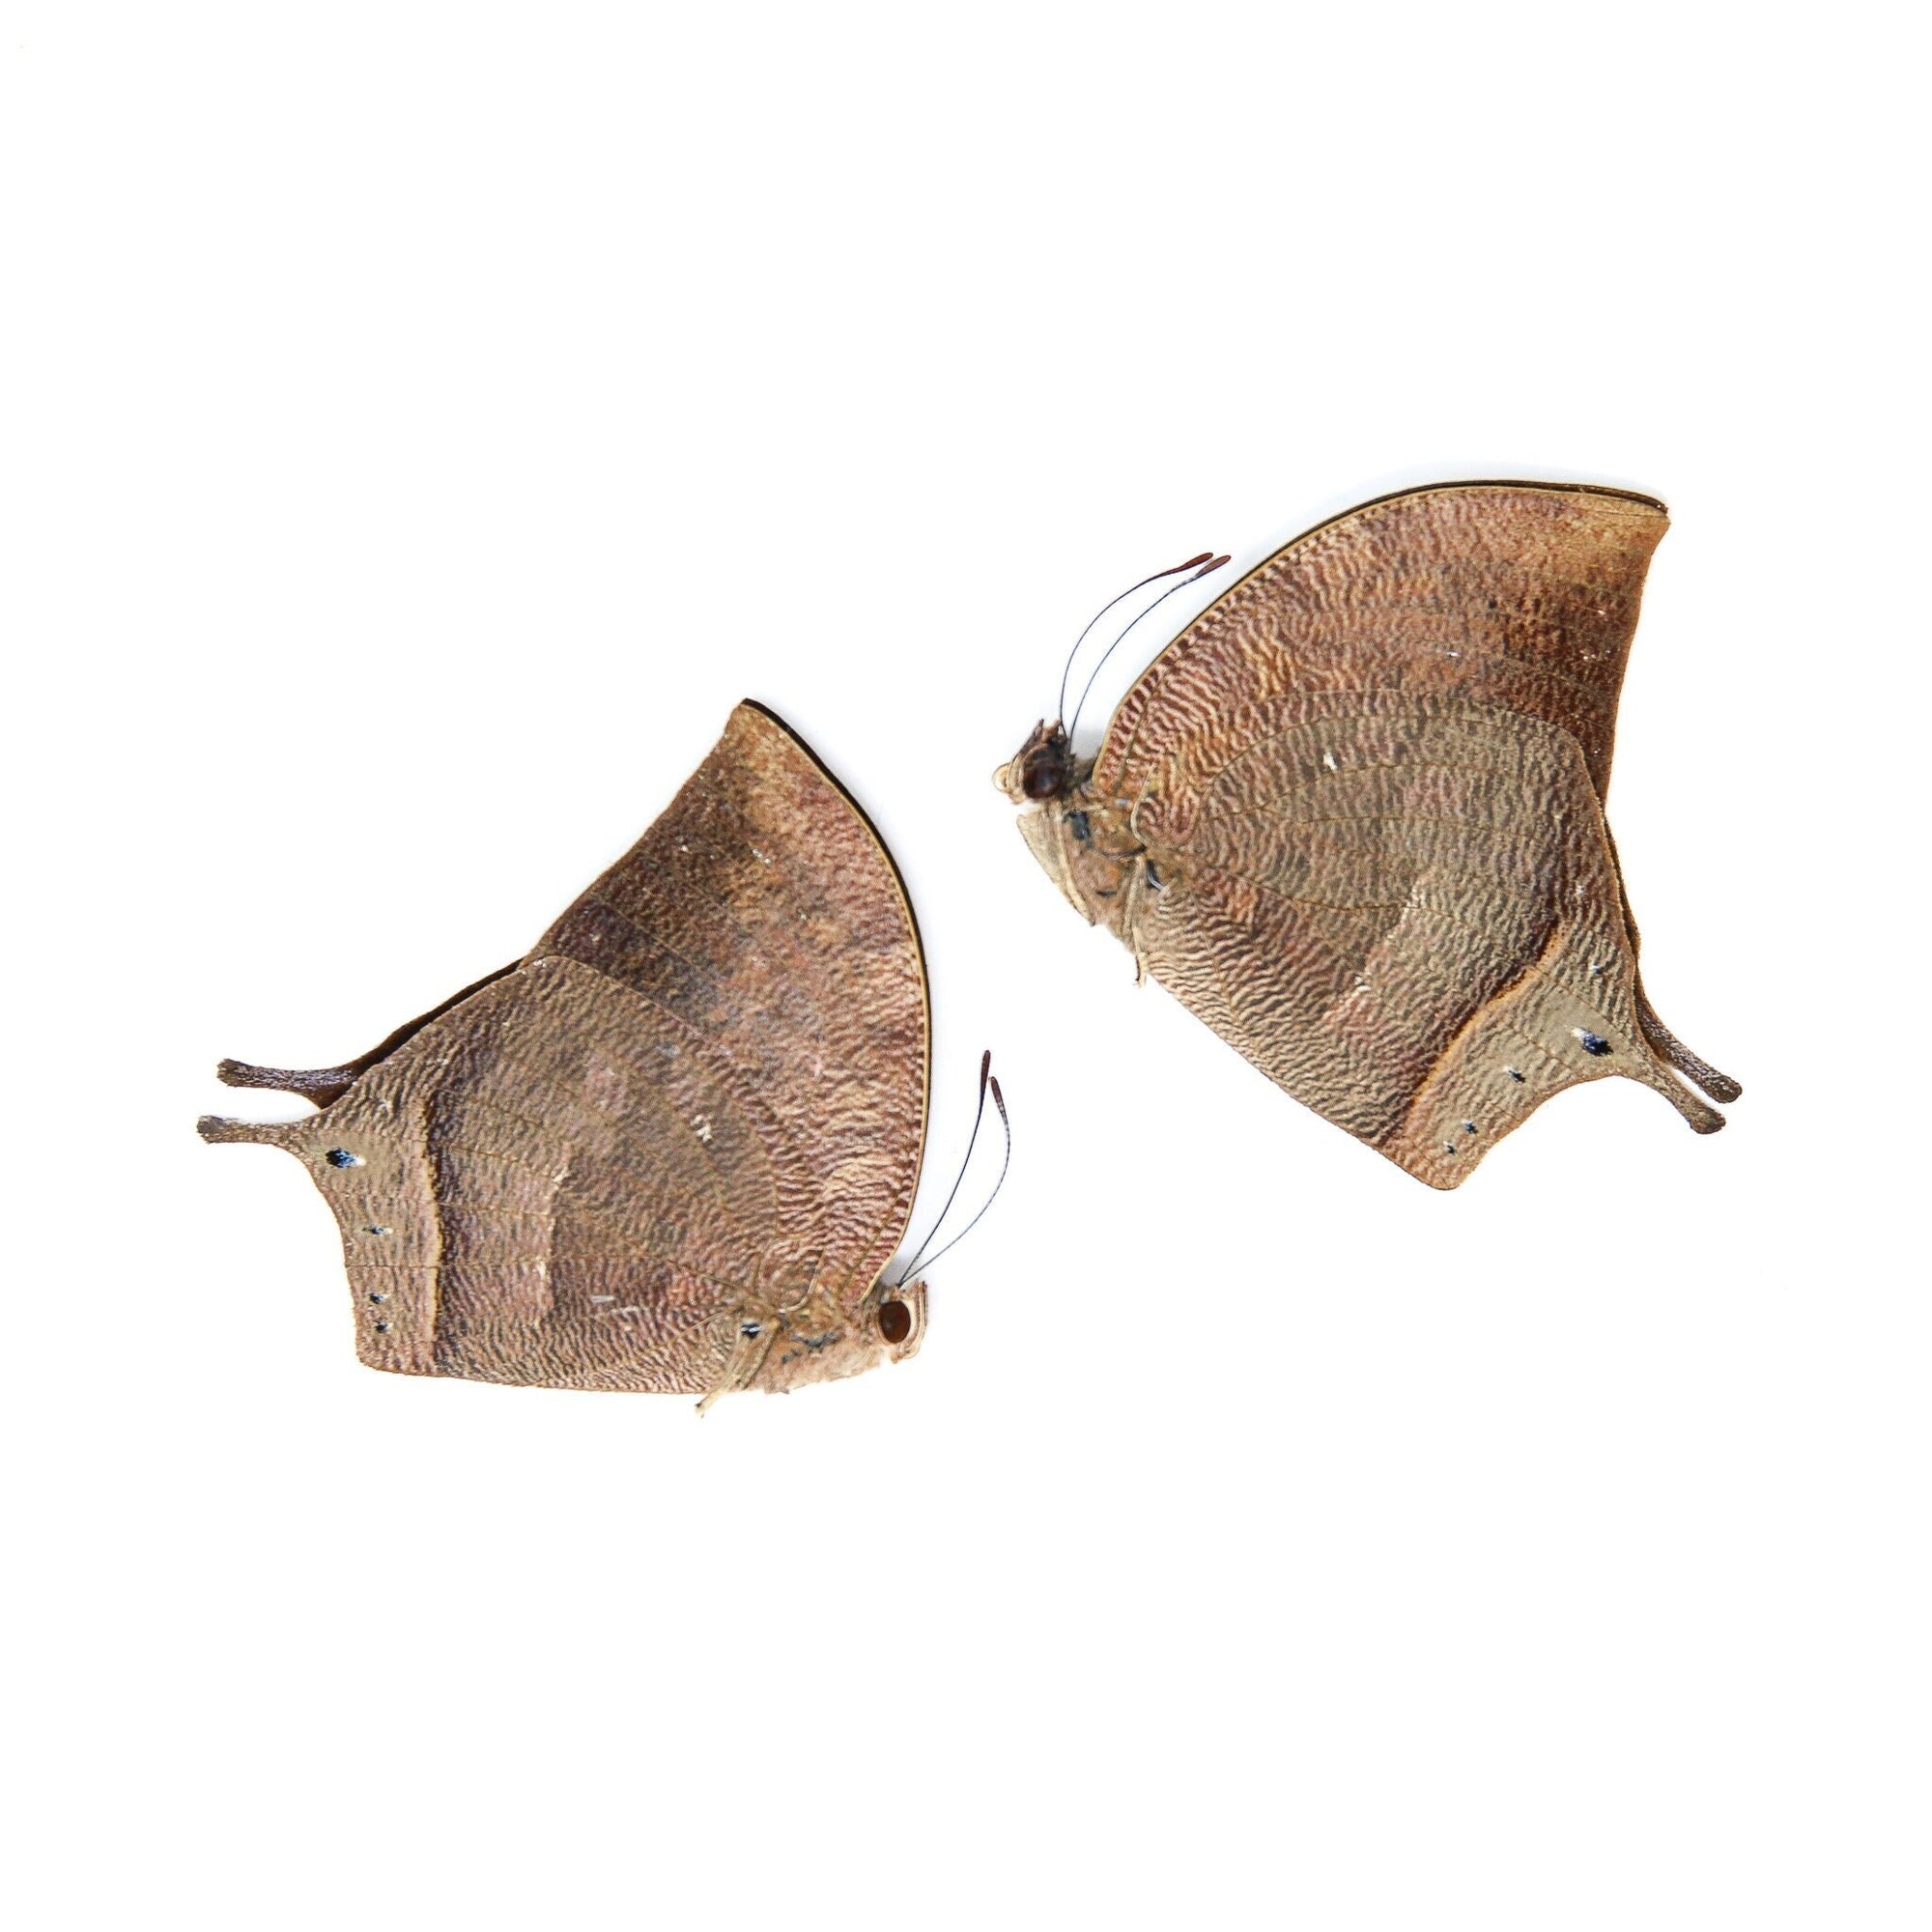 Two (2) Anaea nessus, A1 Real Dry-Preserved Butterflies, Unmounted Entomology Taxidermy Specimens